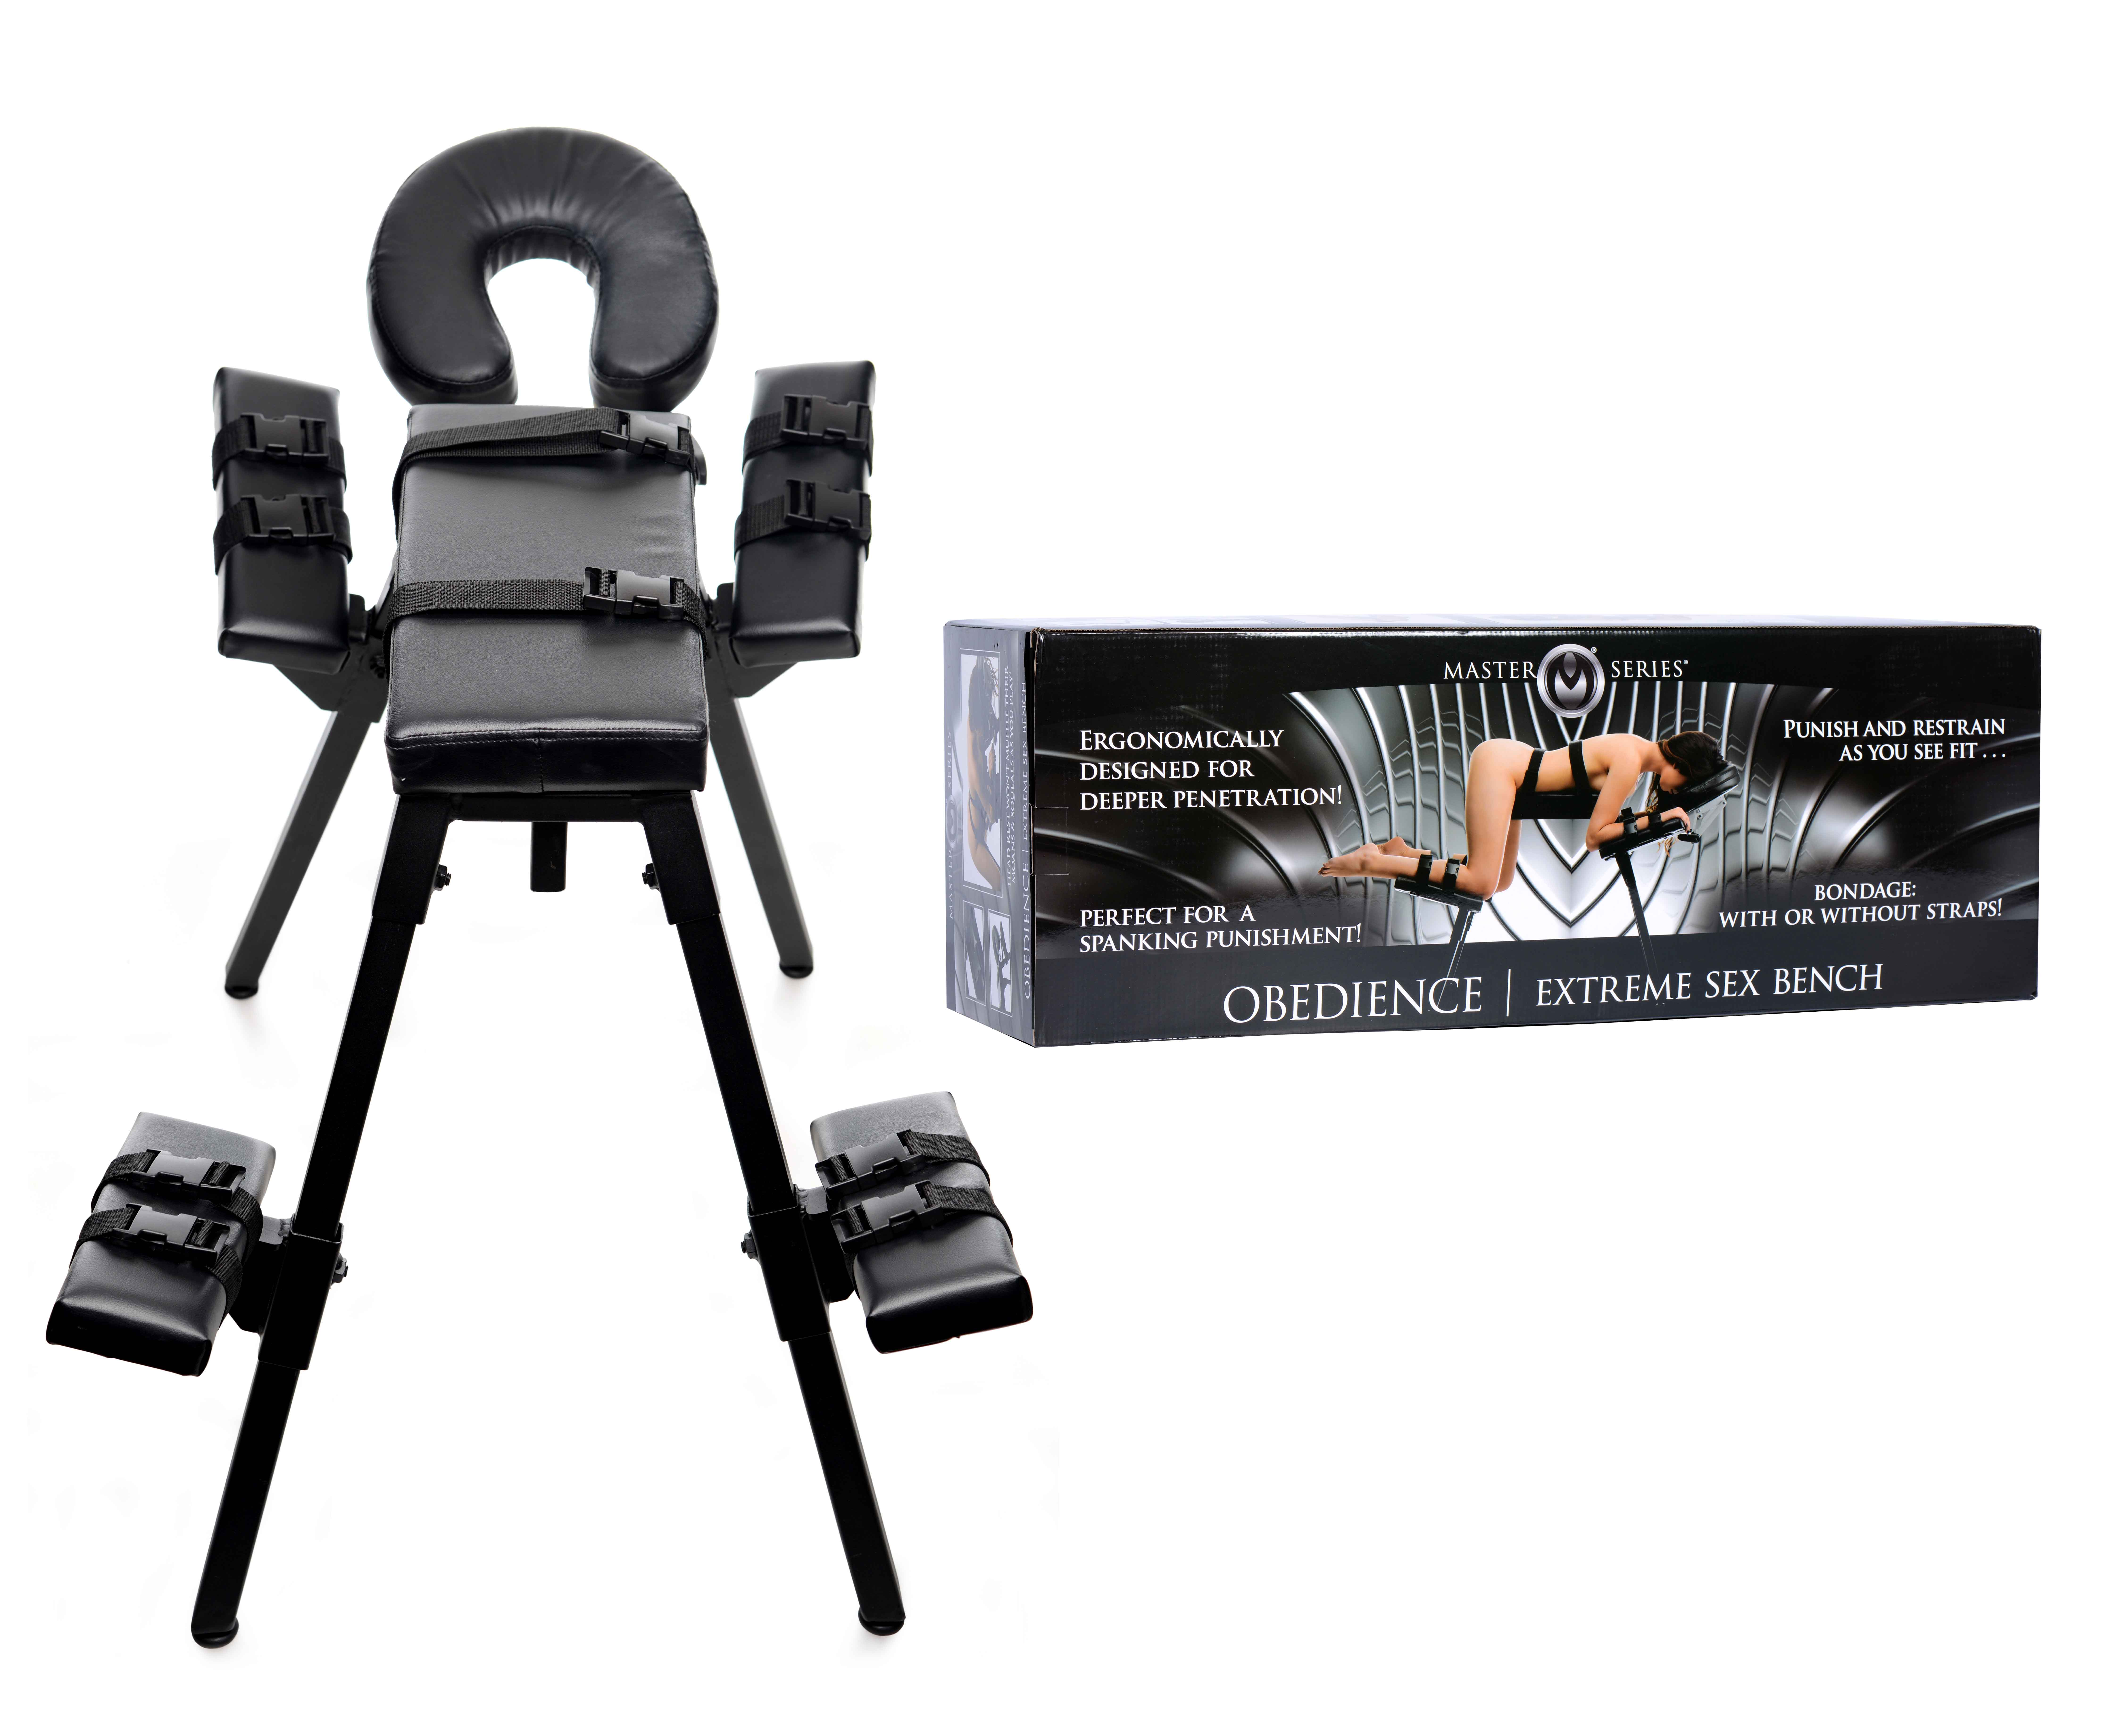 MASTER SERIES Obedience Extreme Sex Bench